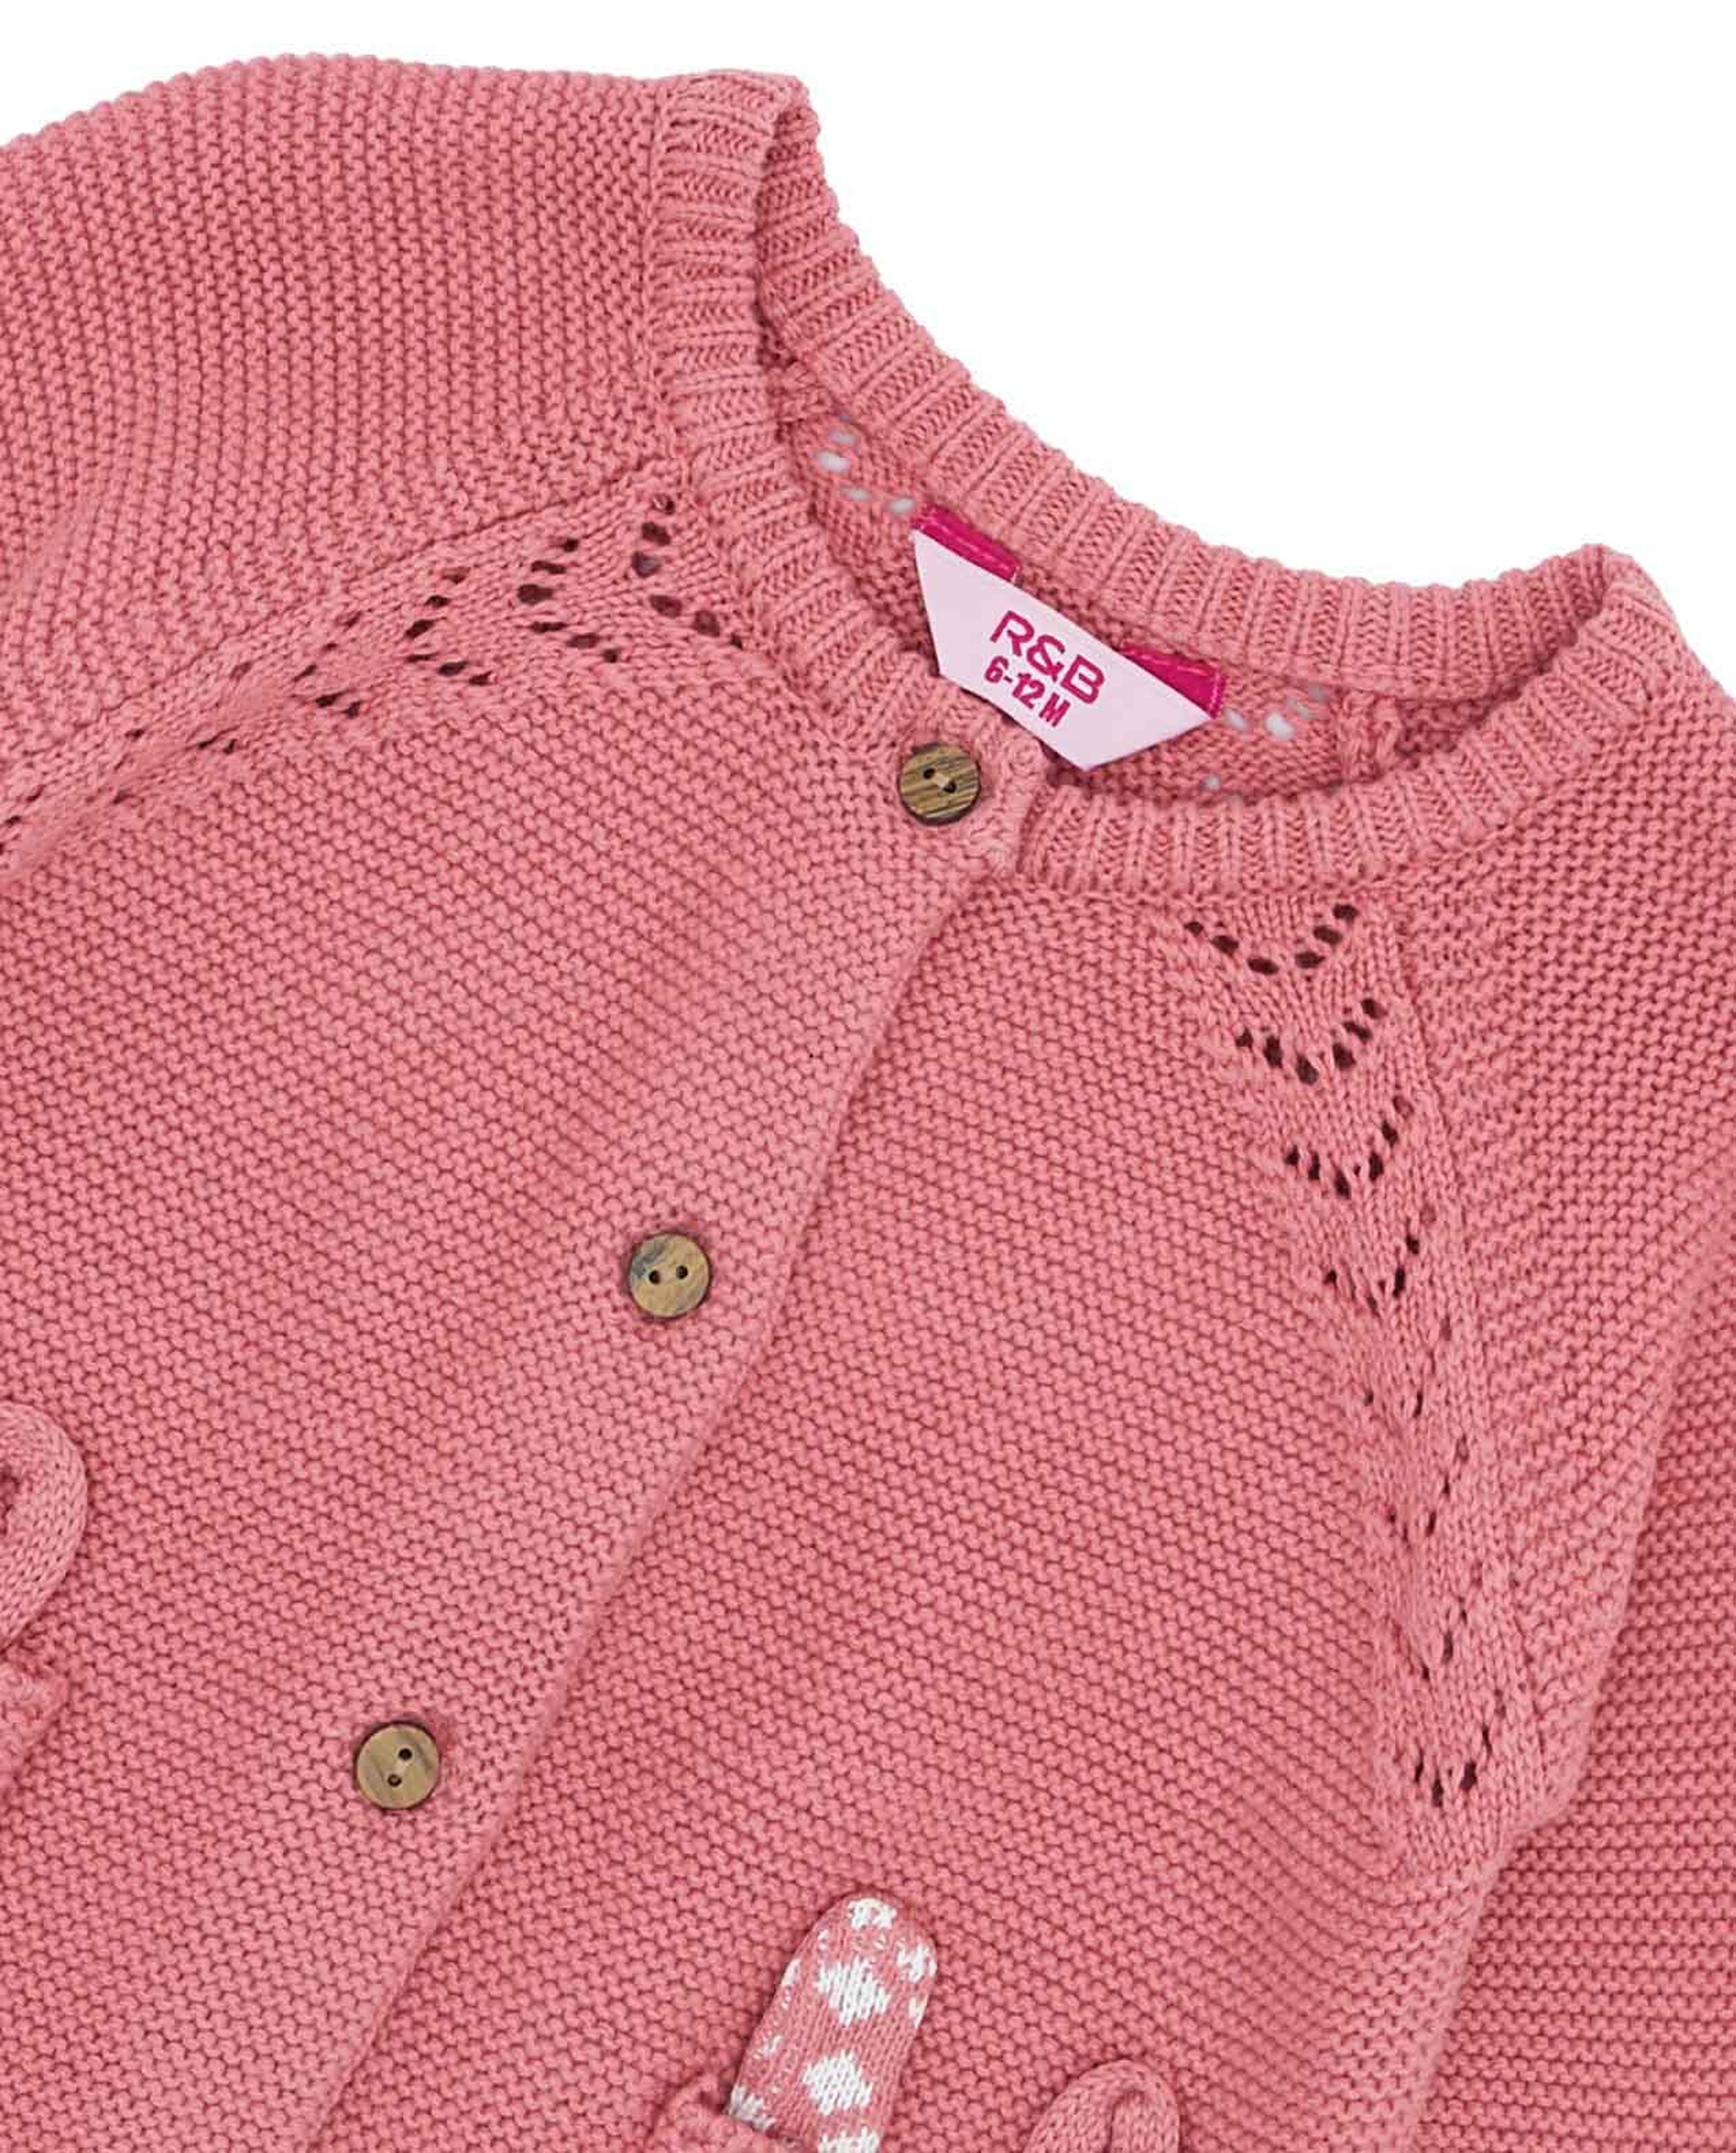 Embroidered Cardigan with Button Closure